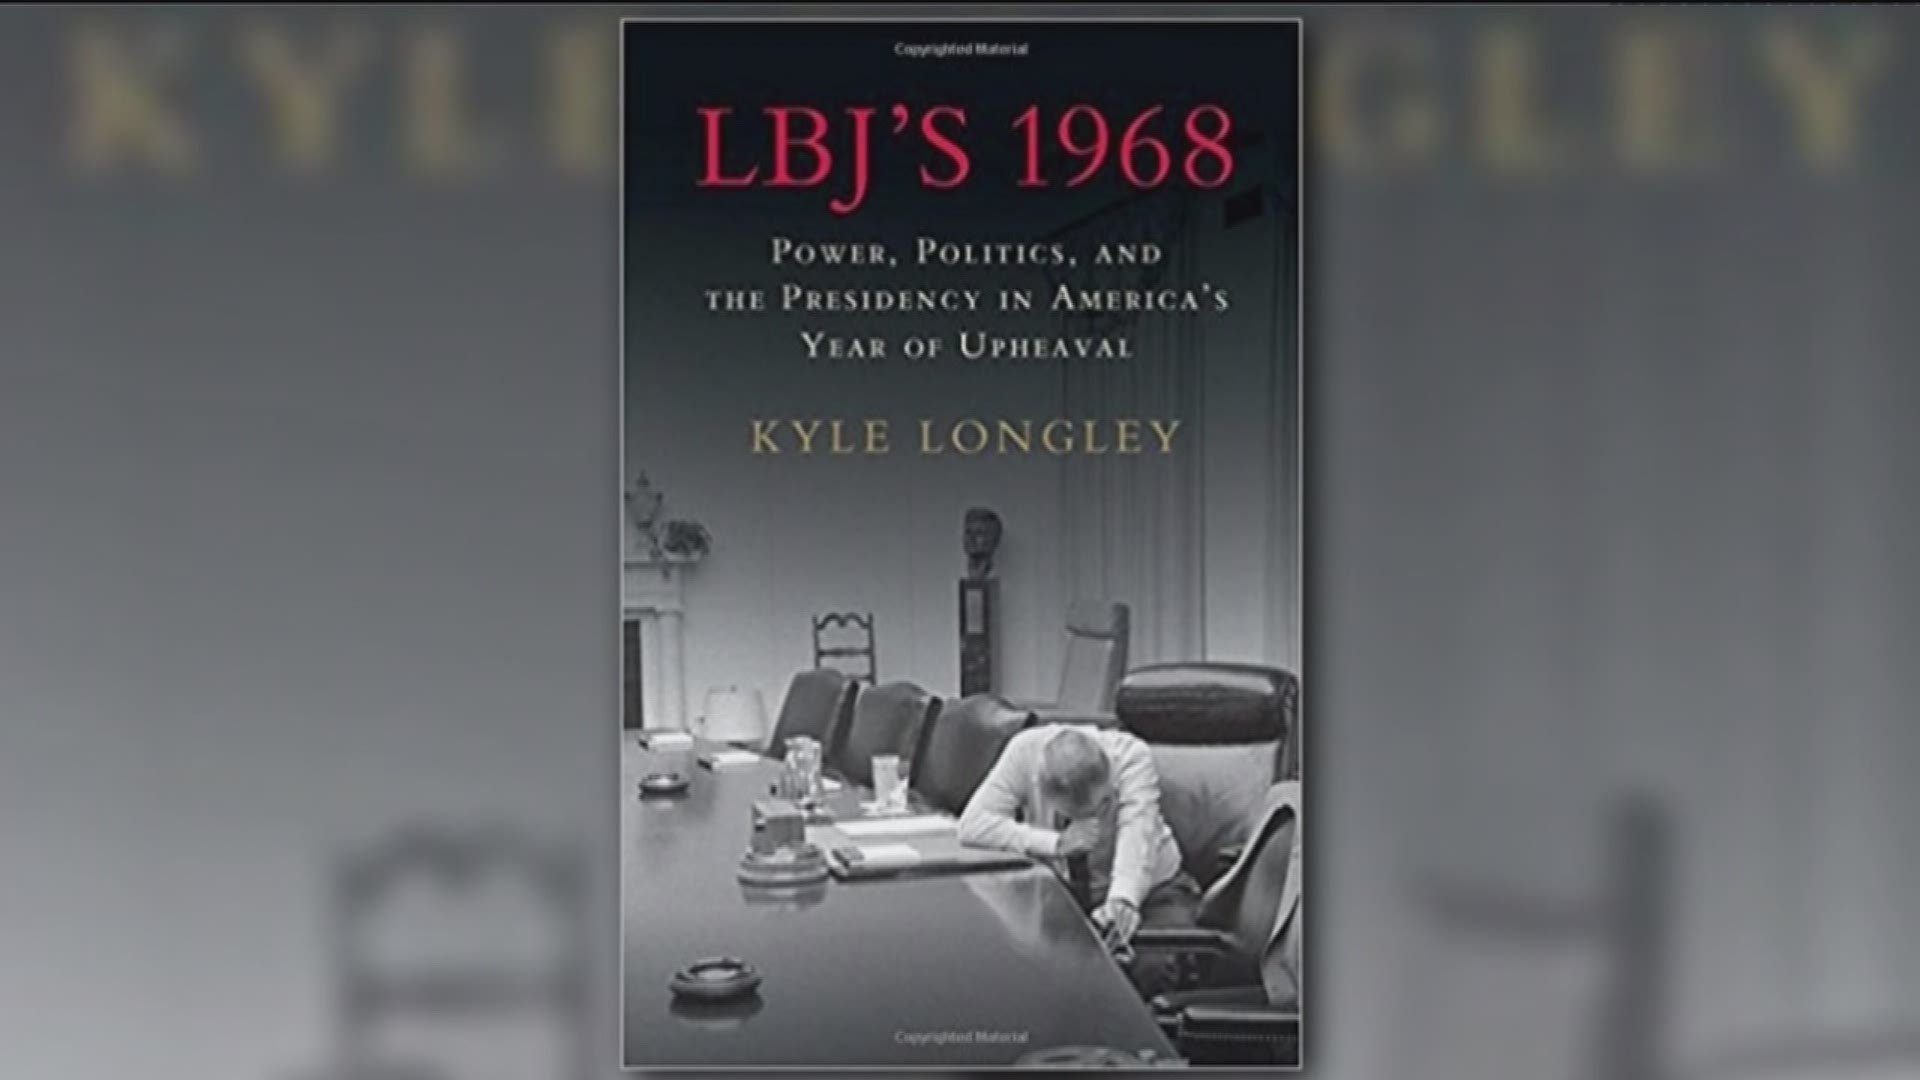 Kyle Longley, author of "LBJ's 1968: Power, Politics and the Presidency in America's Year of Upheaveal," describes 1968 as America's "nightmare year." Vietnam, high profile assassinations, protests across the country all led to Lyndon B. Johnson's decision to not run for president again.